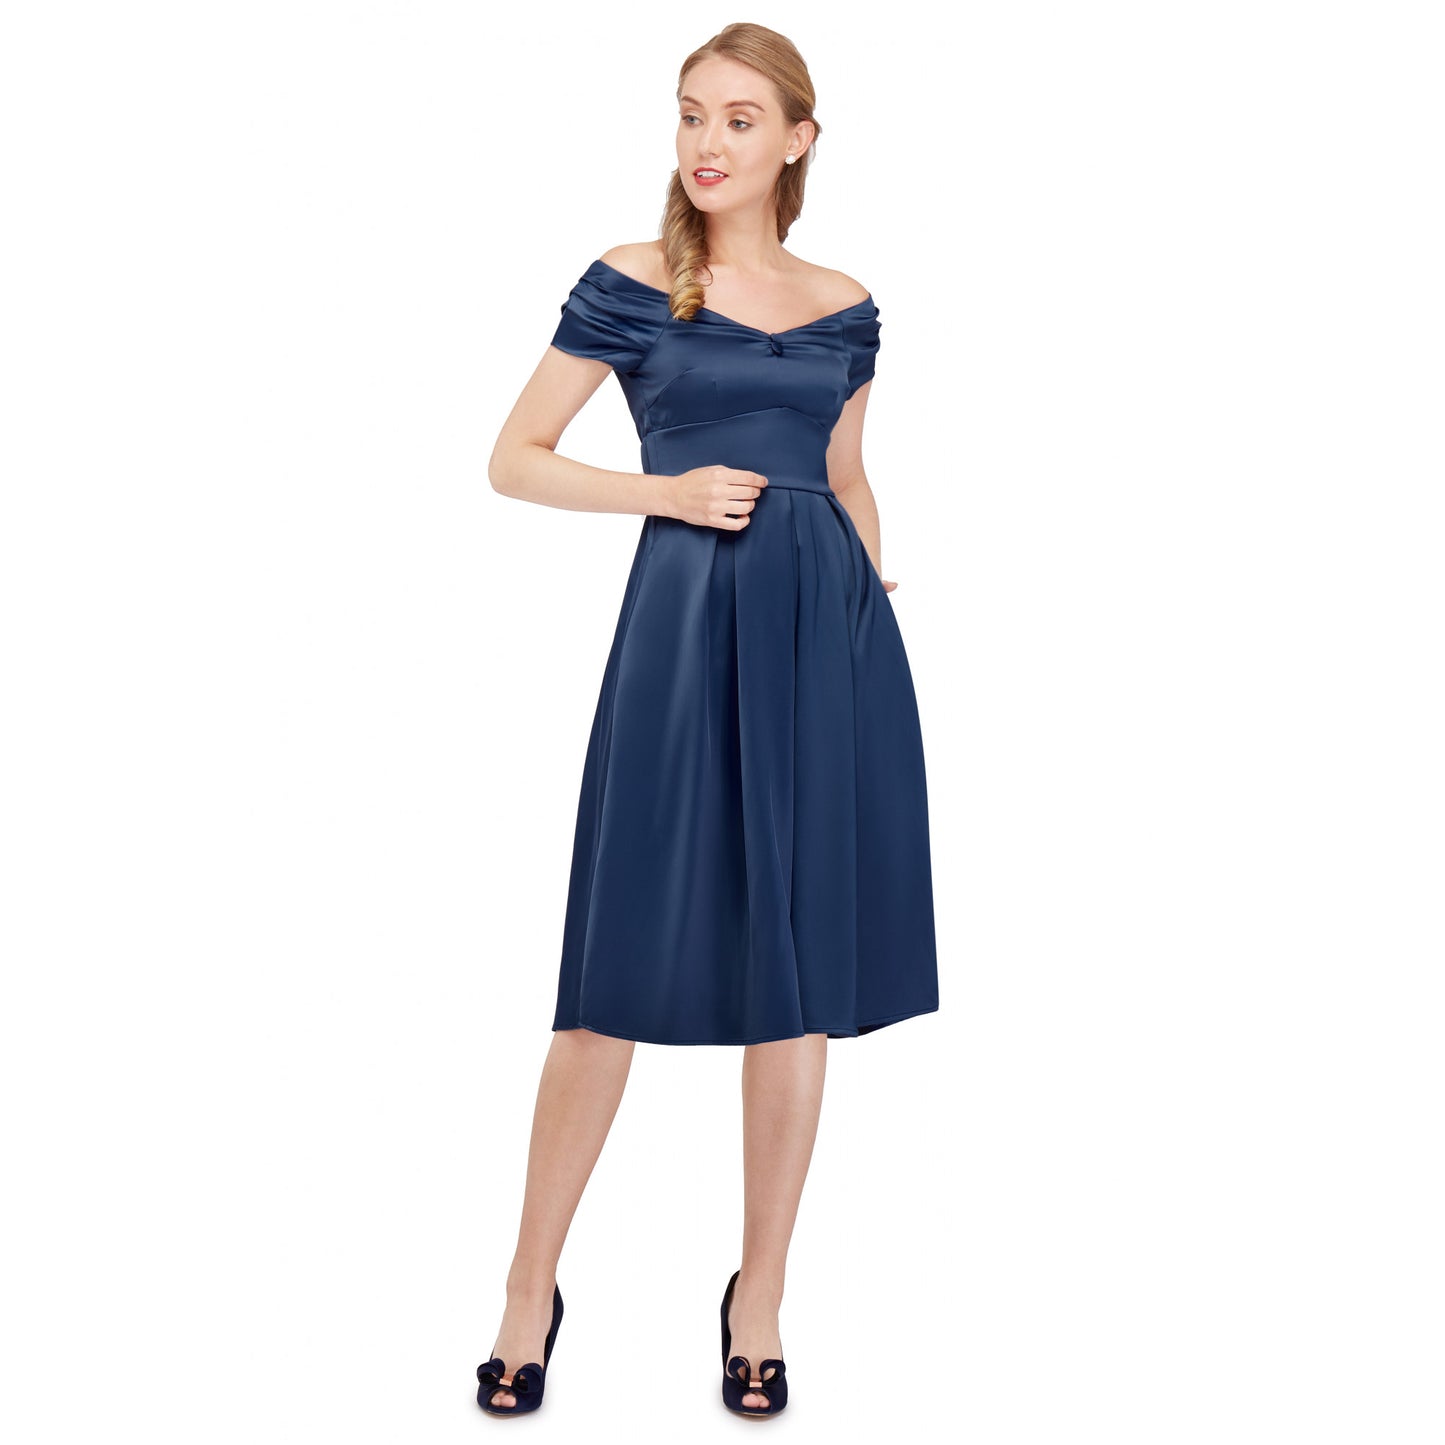 Lily Blue Satin Off Shoulder Swing Dress by Dolly & Dotty